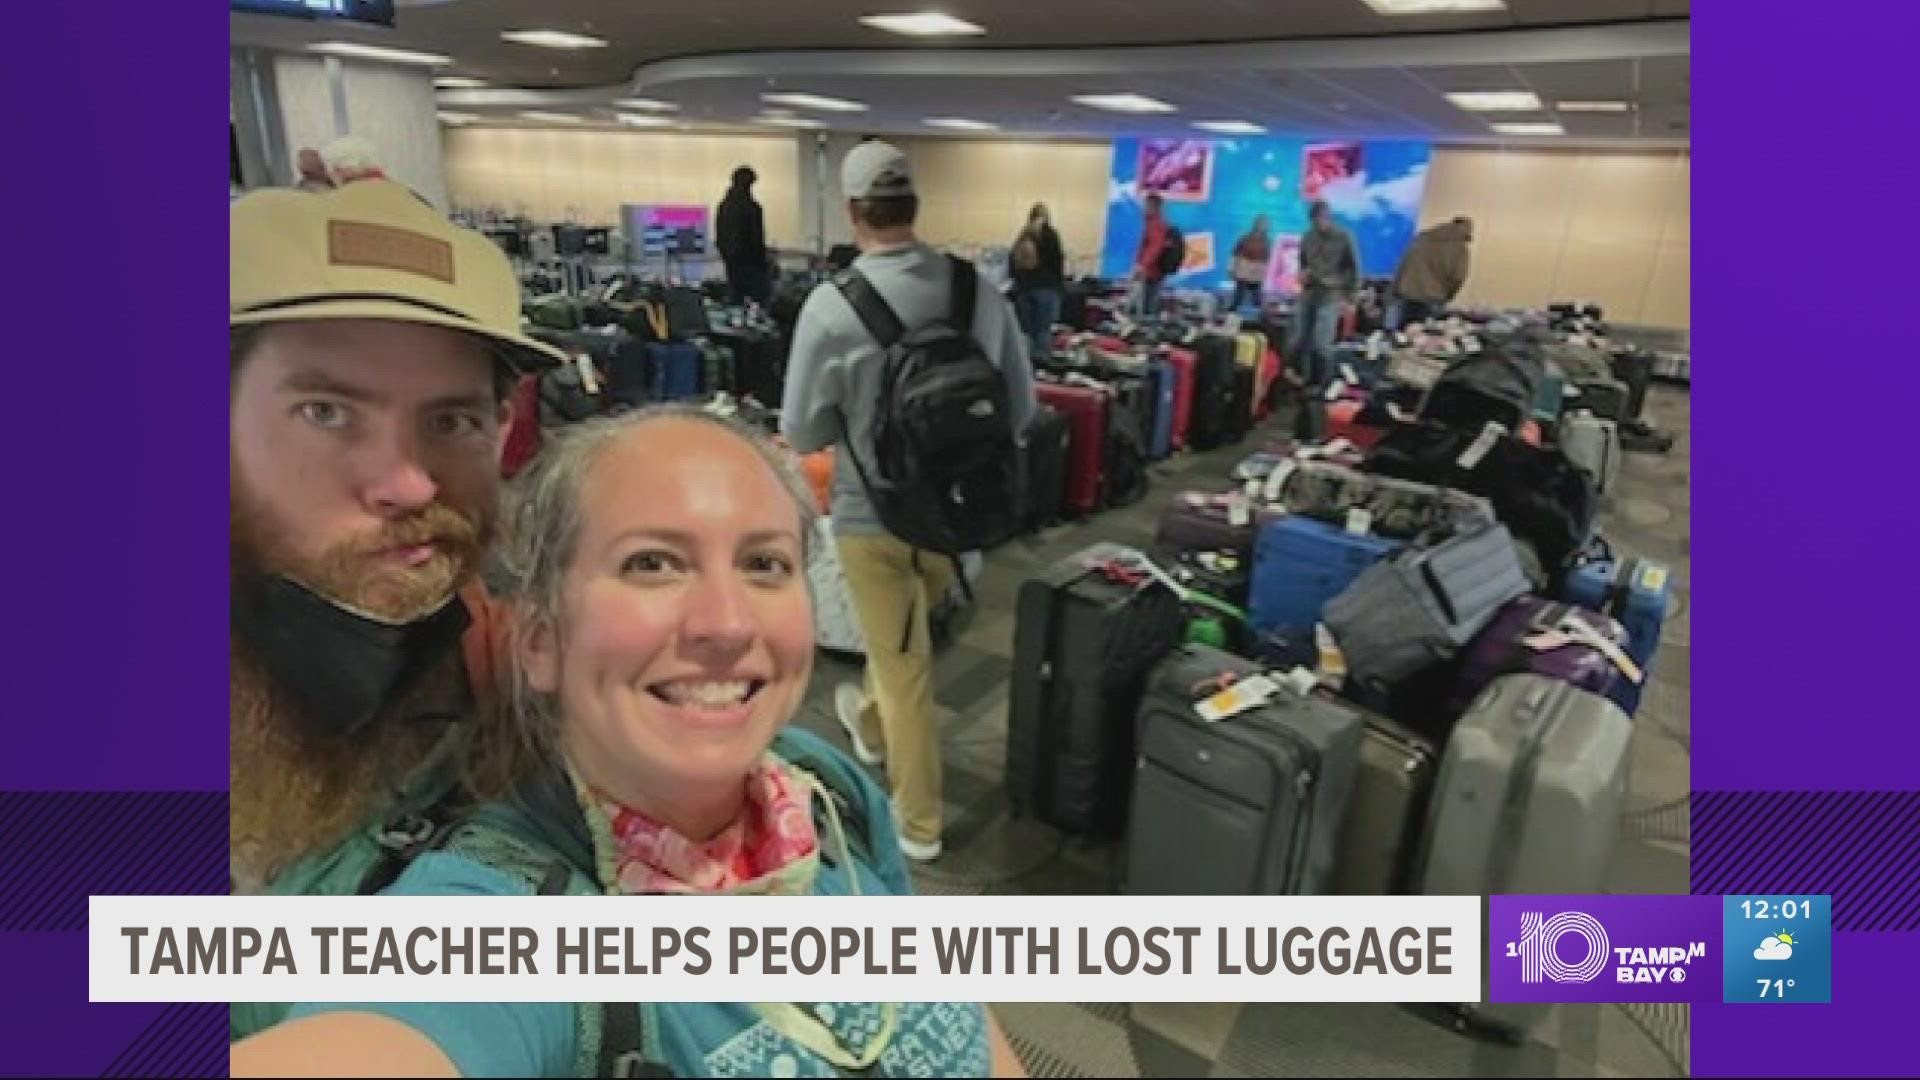 Brittany Loubier-Vervisch started looking at people's luggage tags and texting random numbers to let them know their bags had made it to TPA.